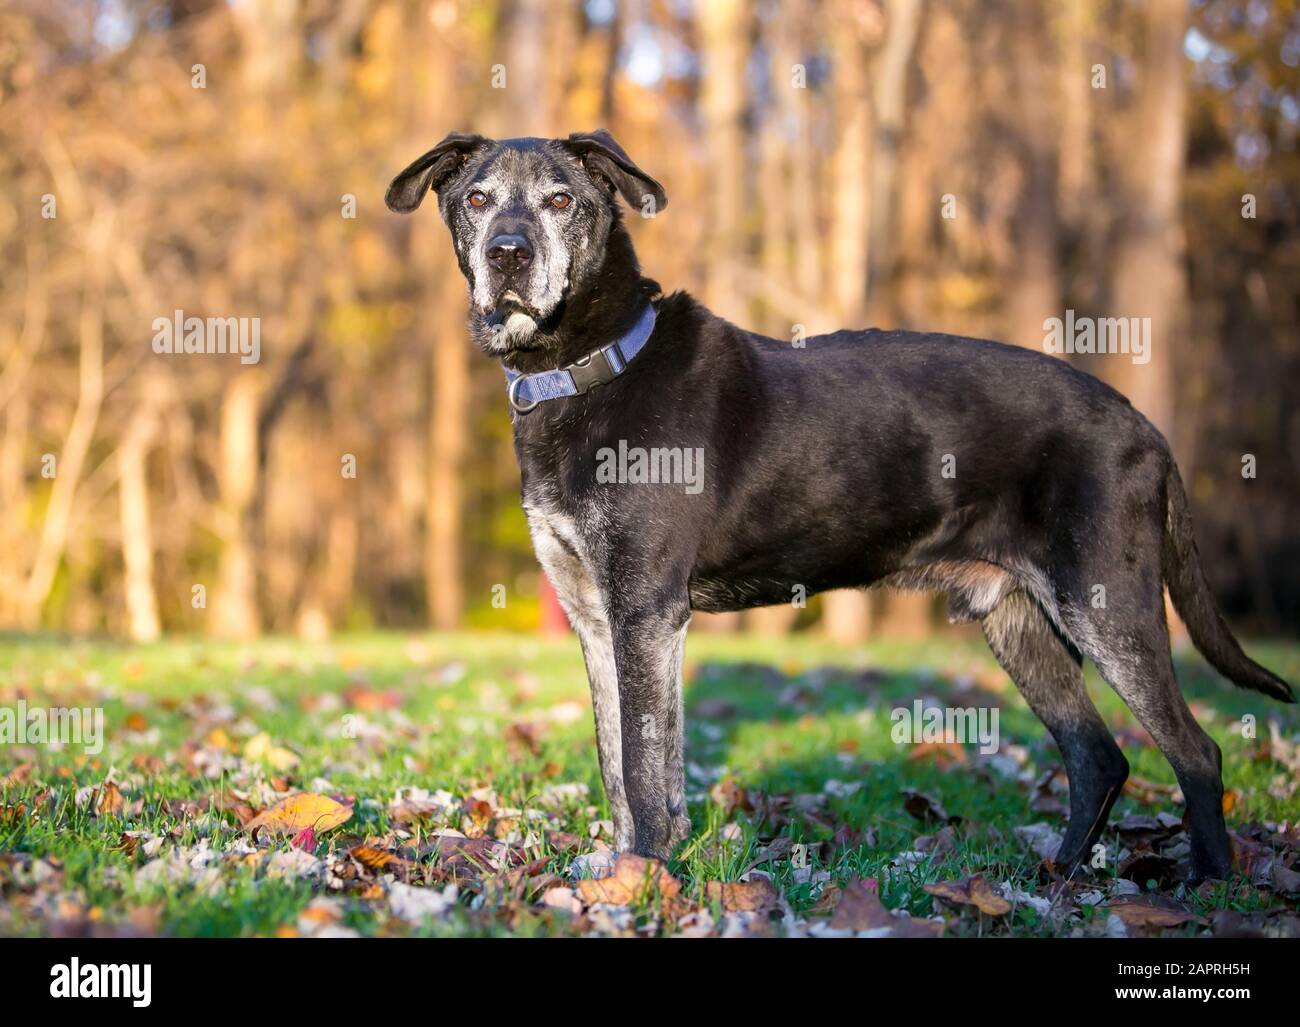 A senior mixed breed dog with a gray face standing outdoors Stock Photo